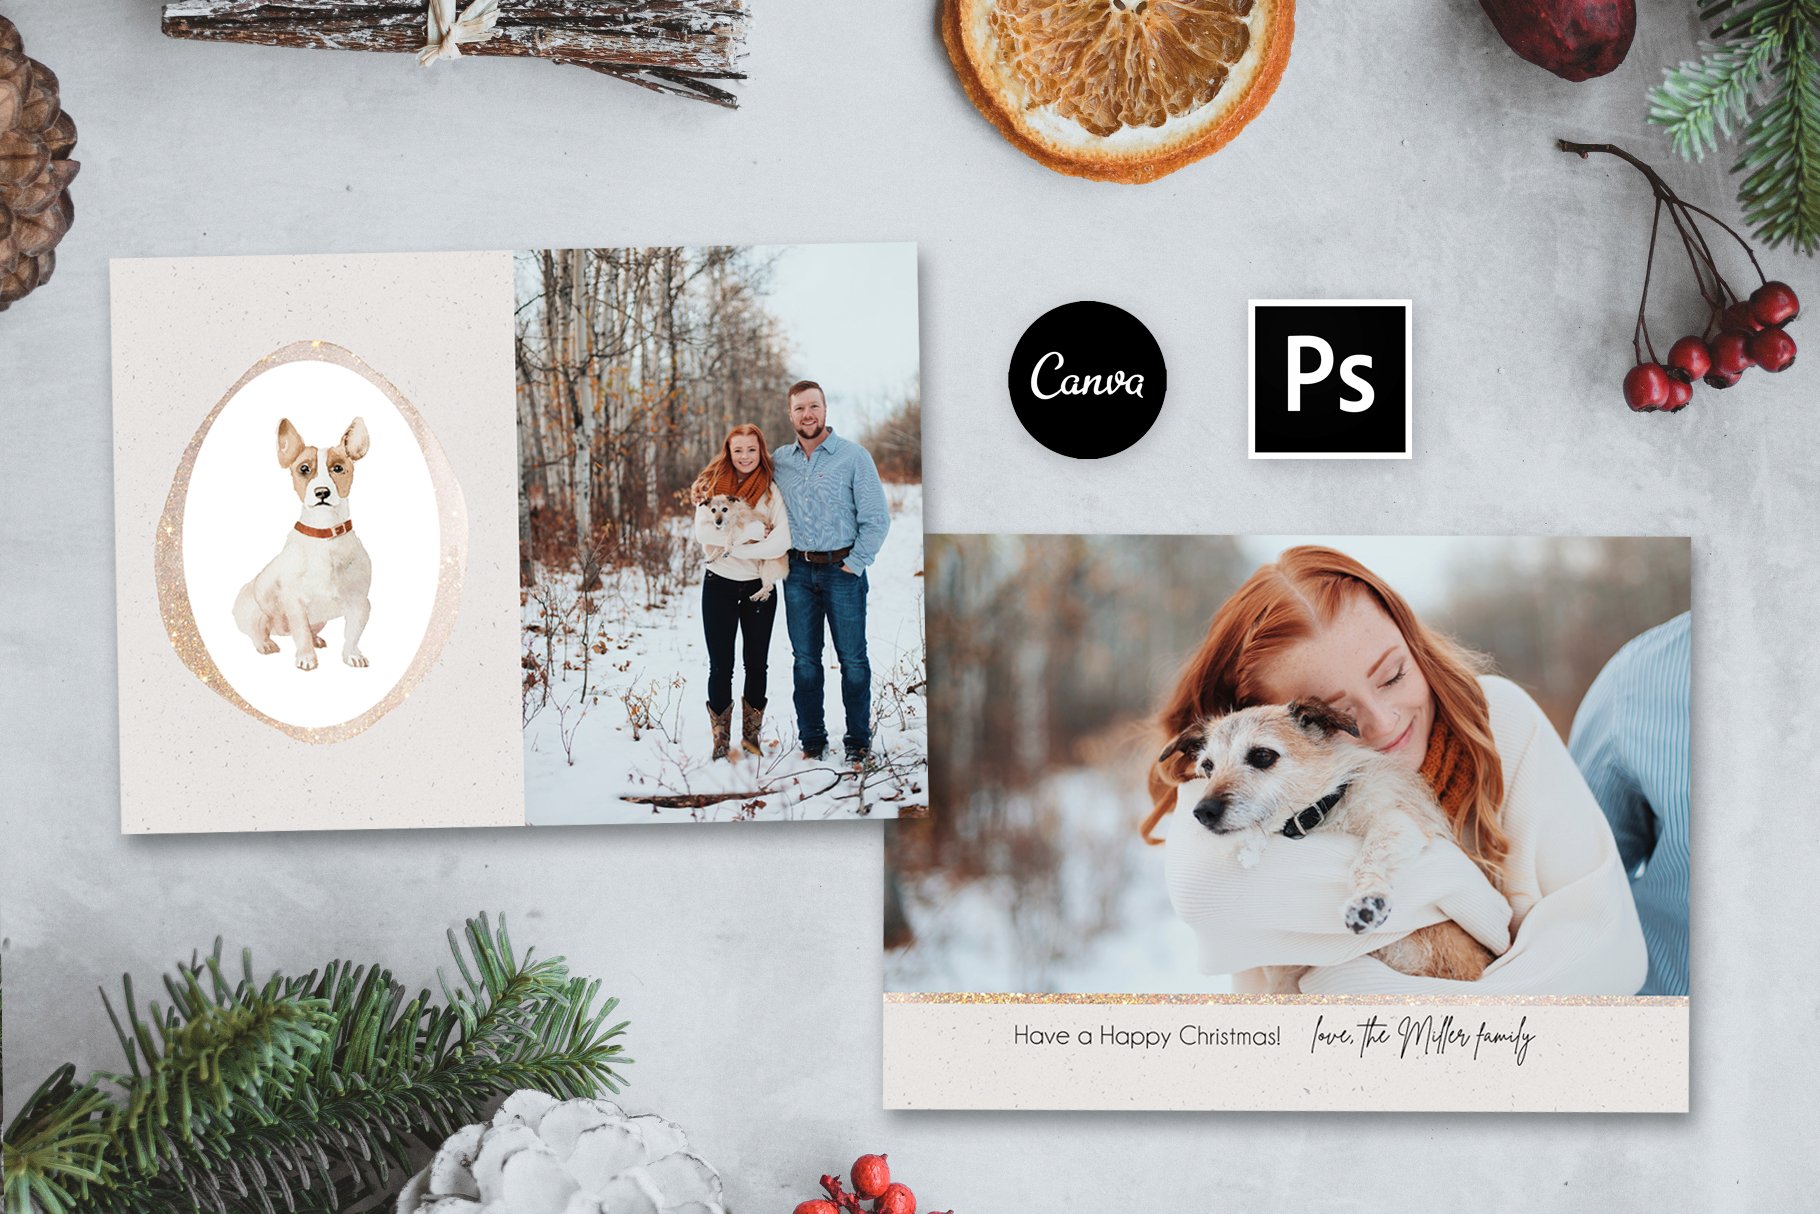 You can mix your photo and photo your pets on the greeting card.